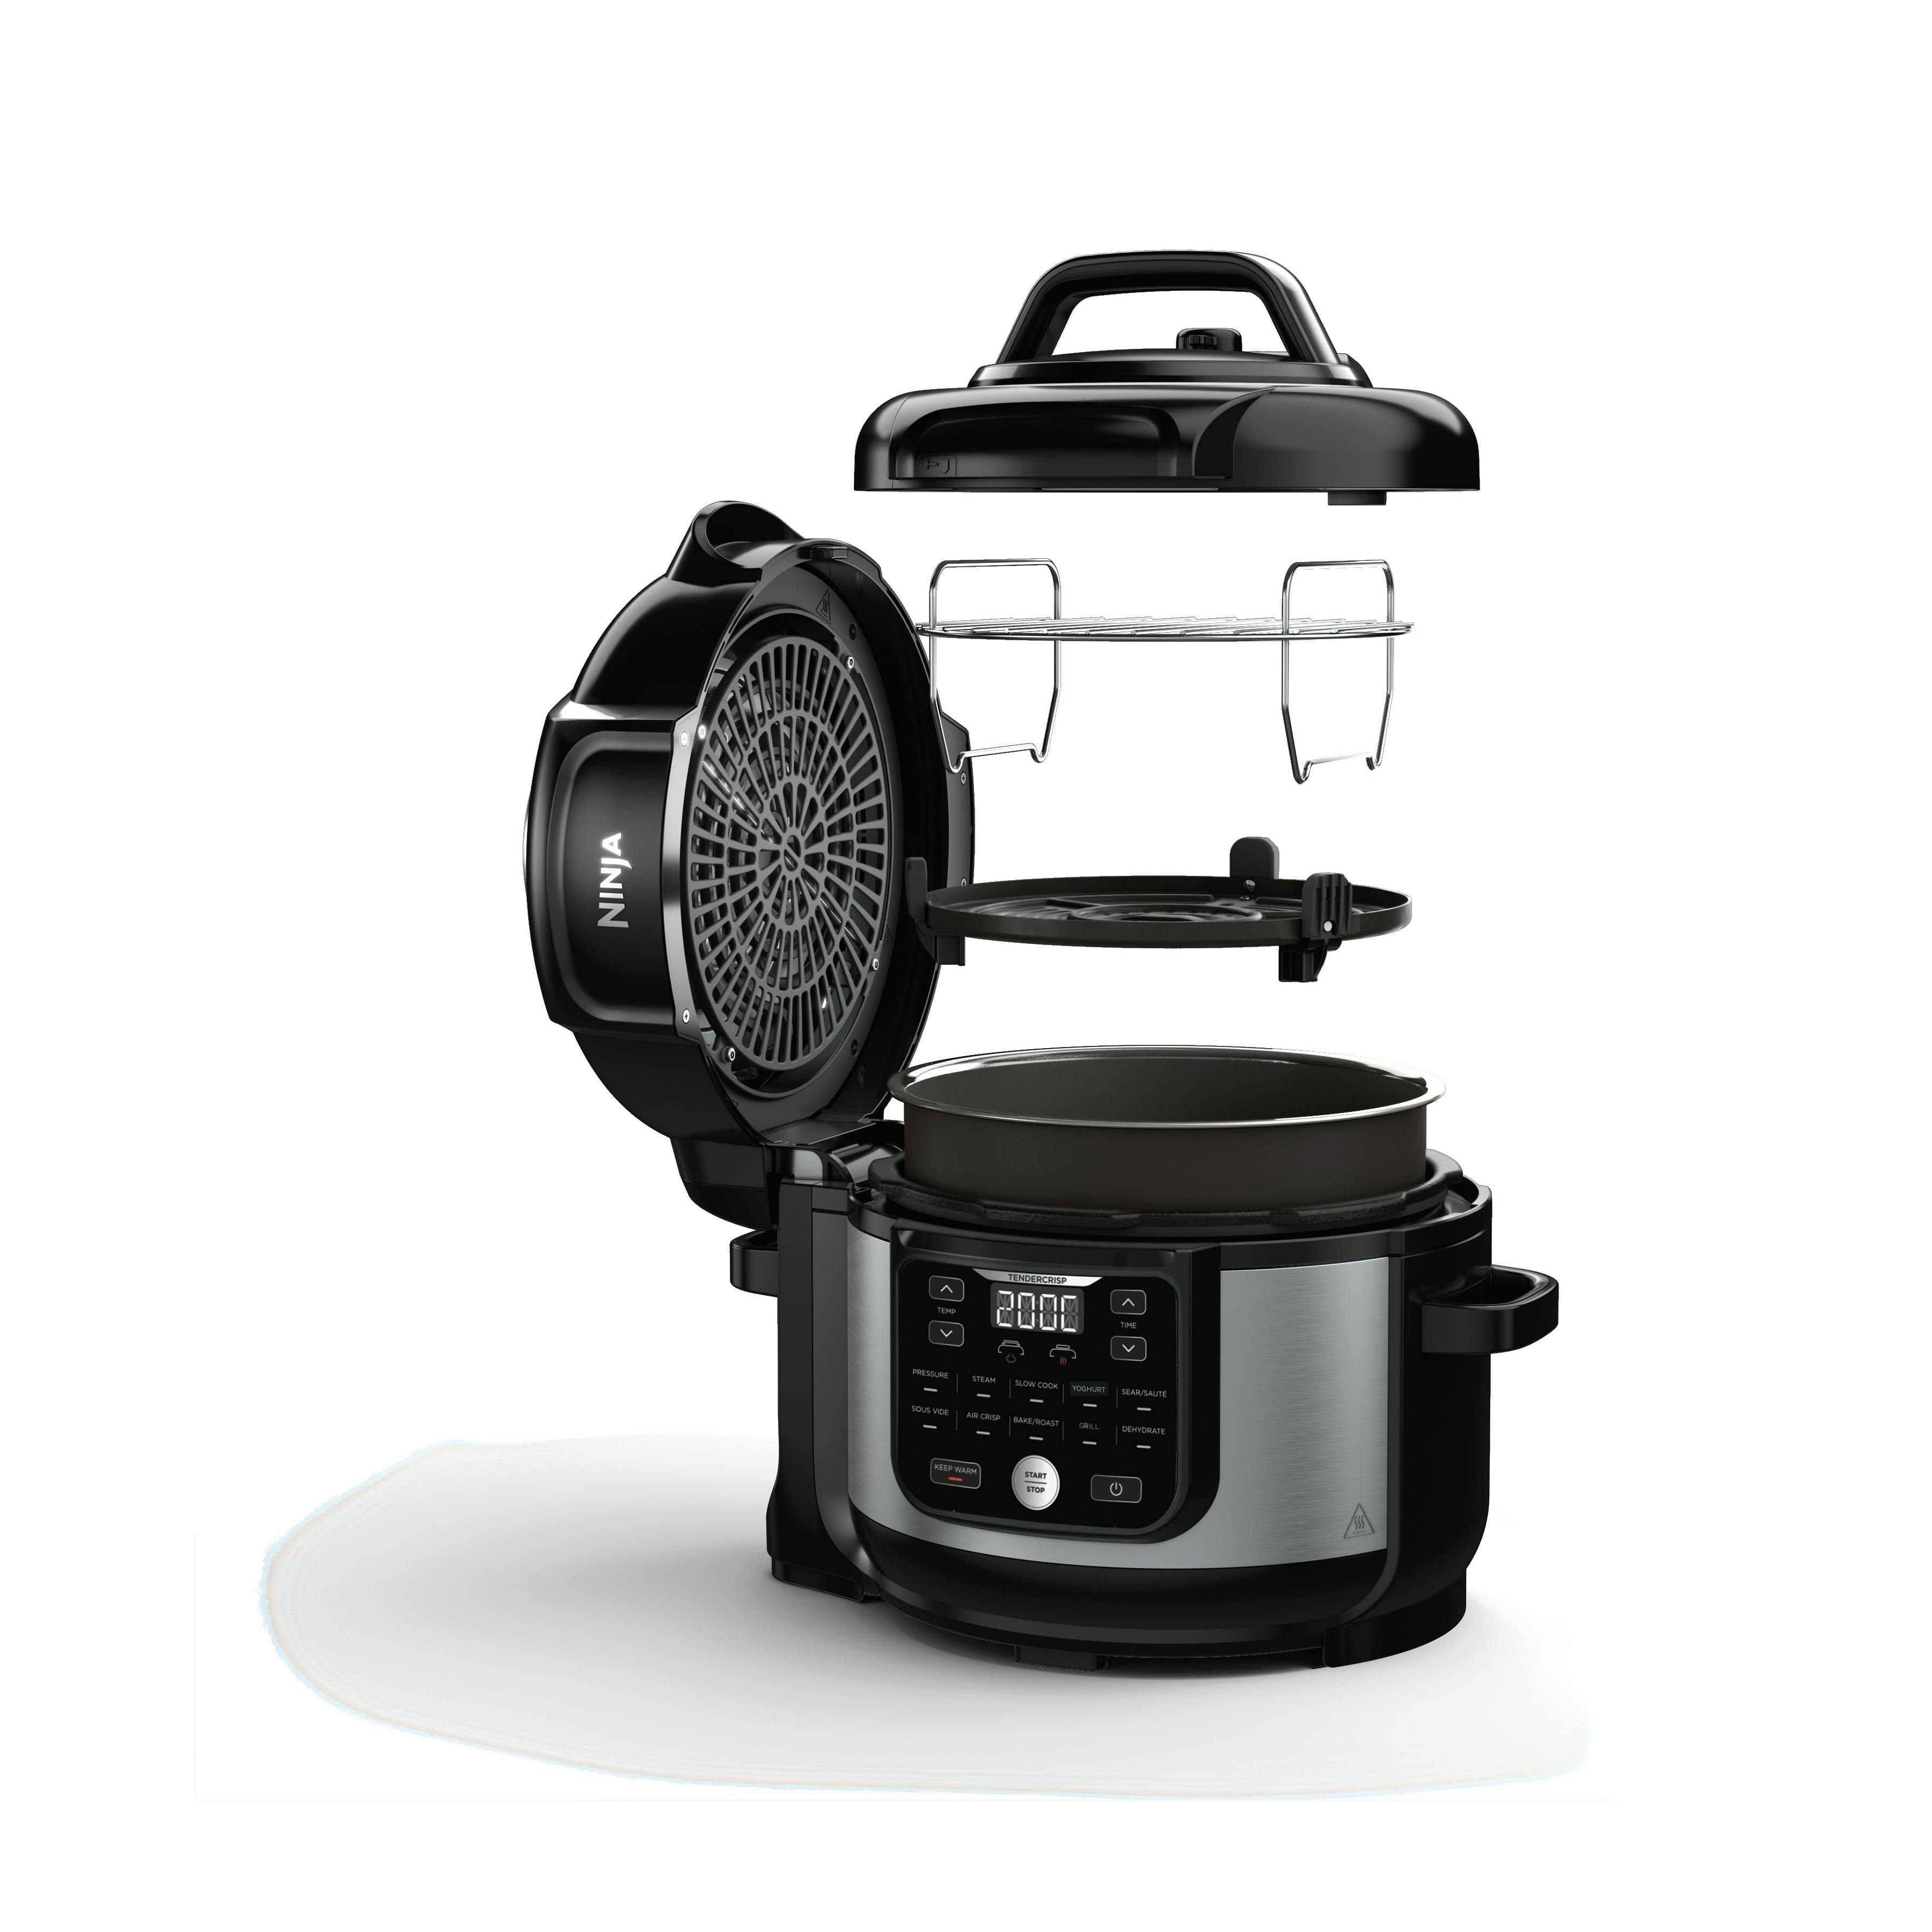 Ninja Foodi all-in-one pressure cooker, air fryer, and steamer - Inceptive  Mind